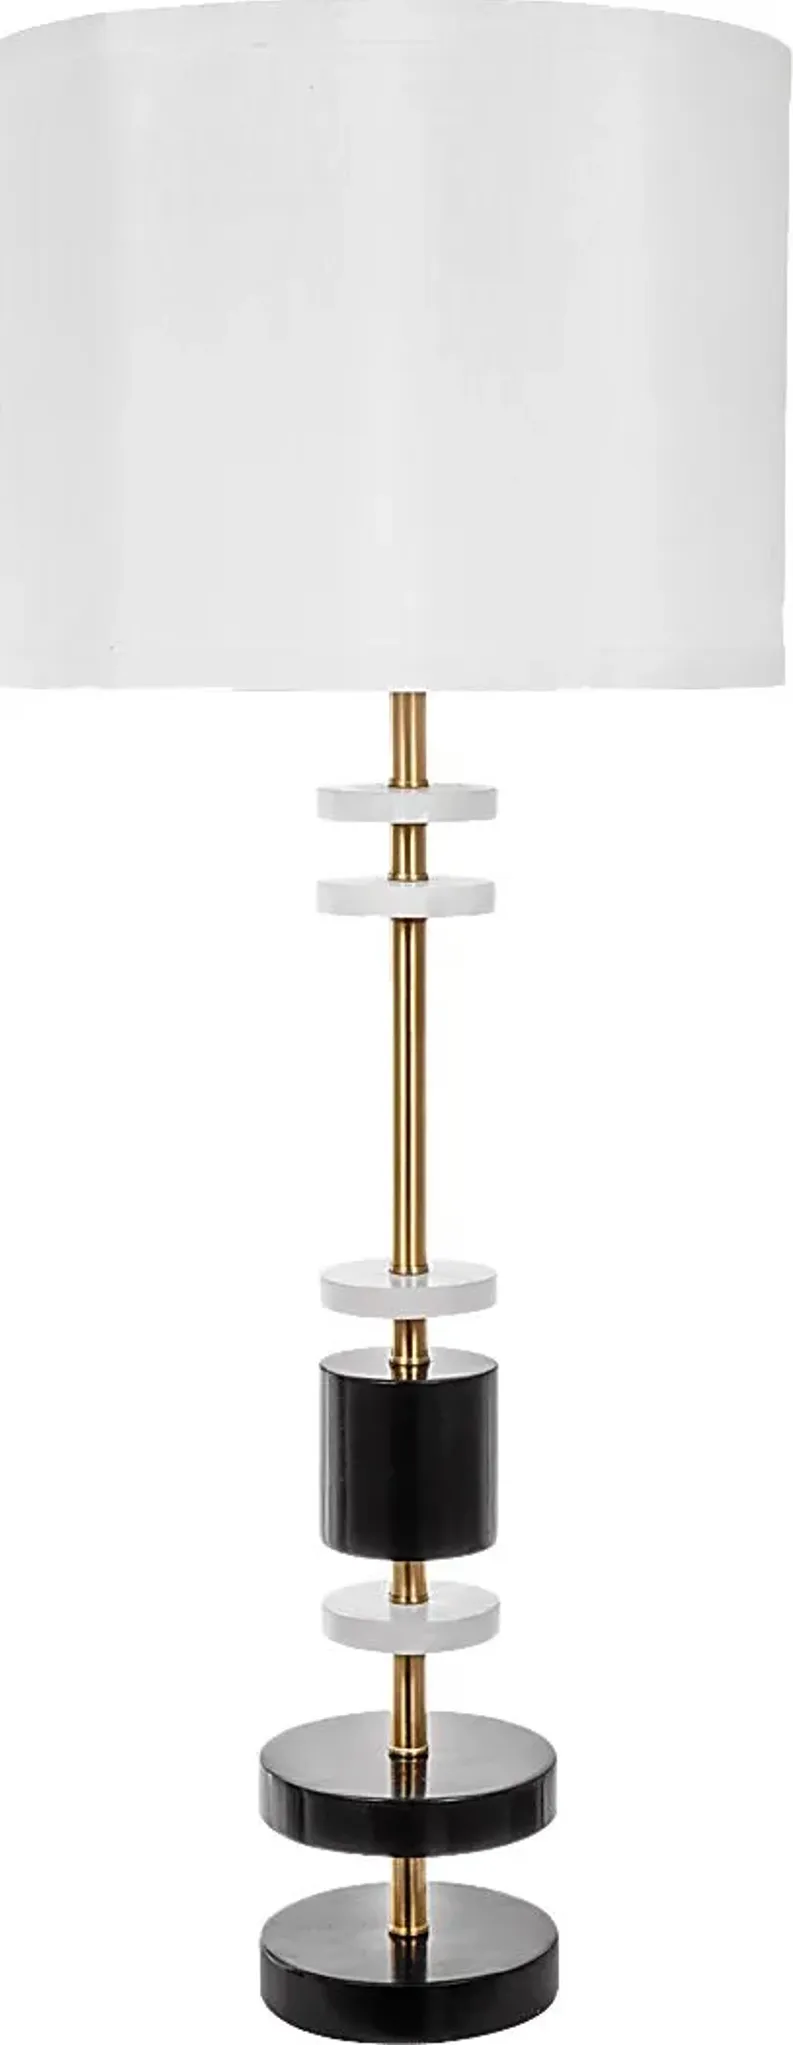 Outrigger Road Black Lamp